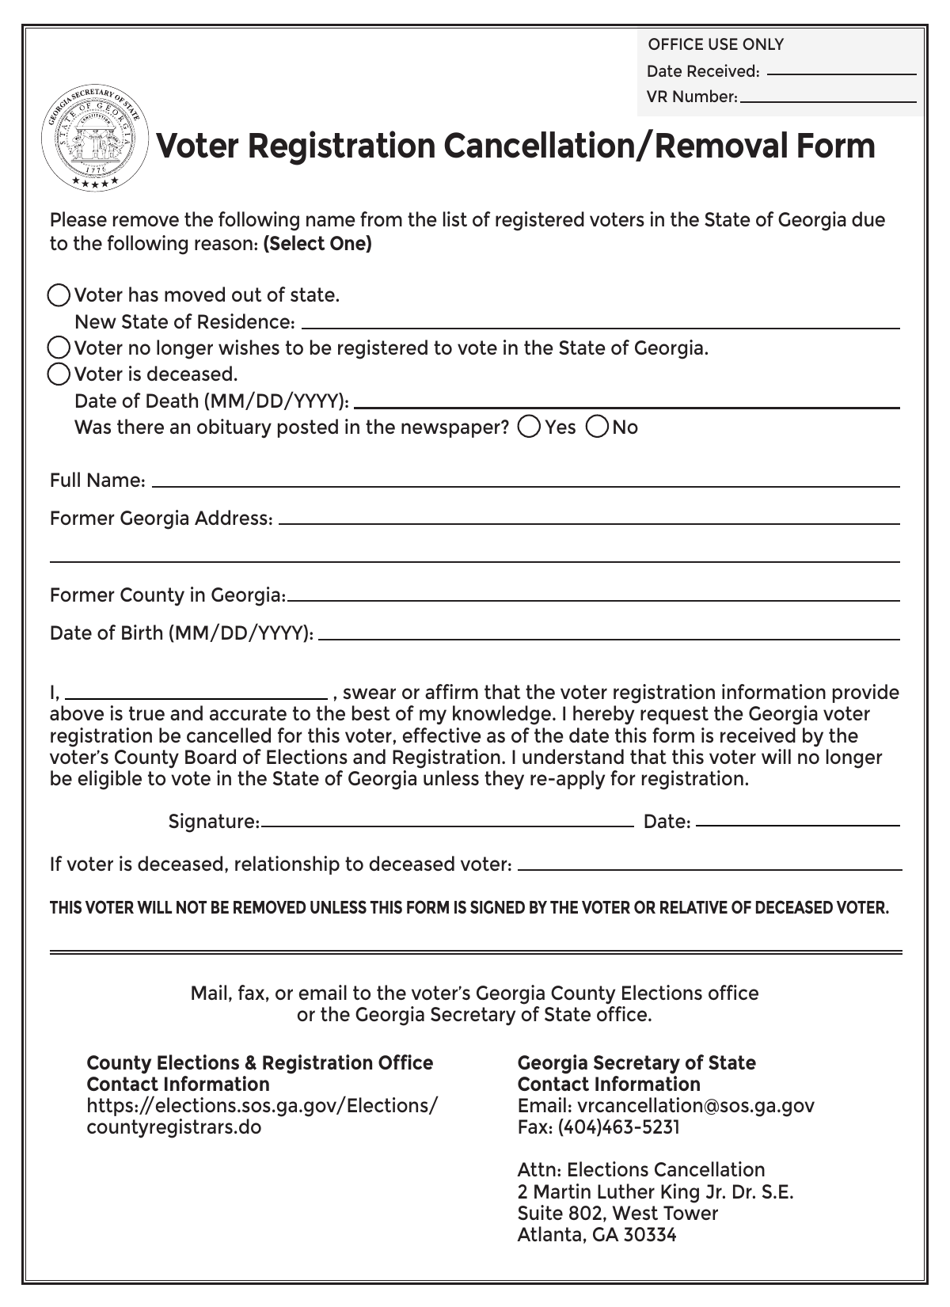 Voter Registration Cancellation / Removal Form - Georgia (United States), Page 1